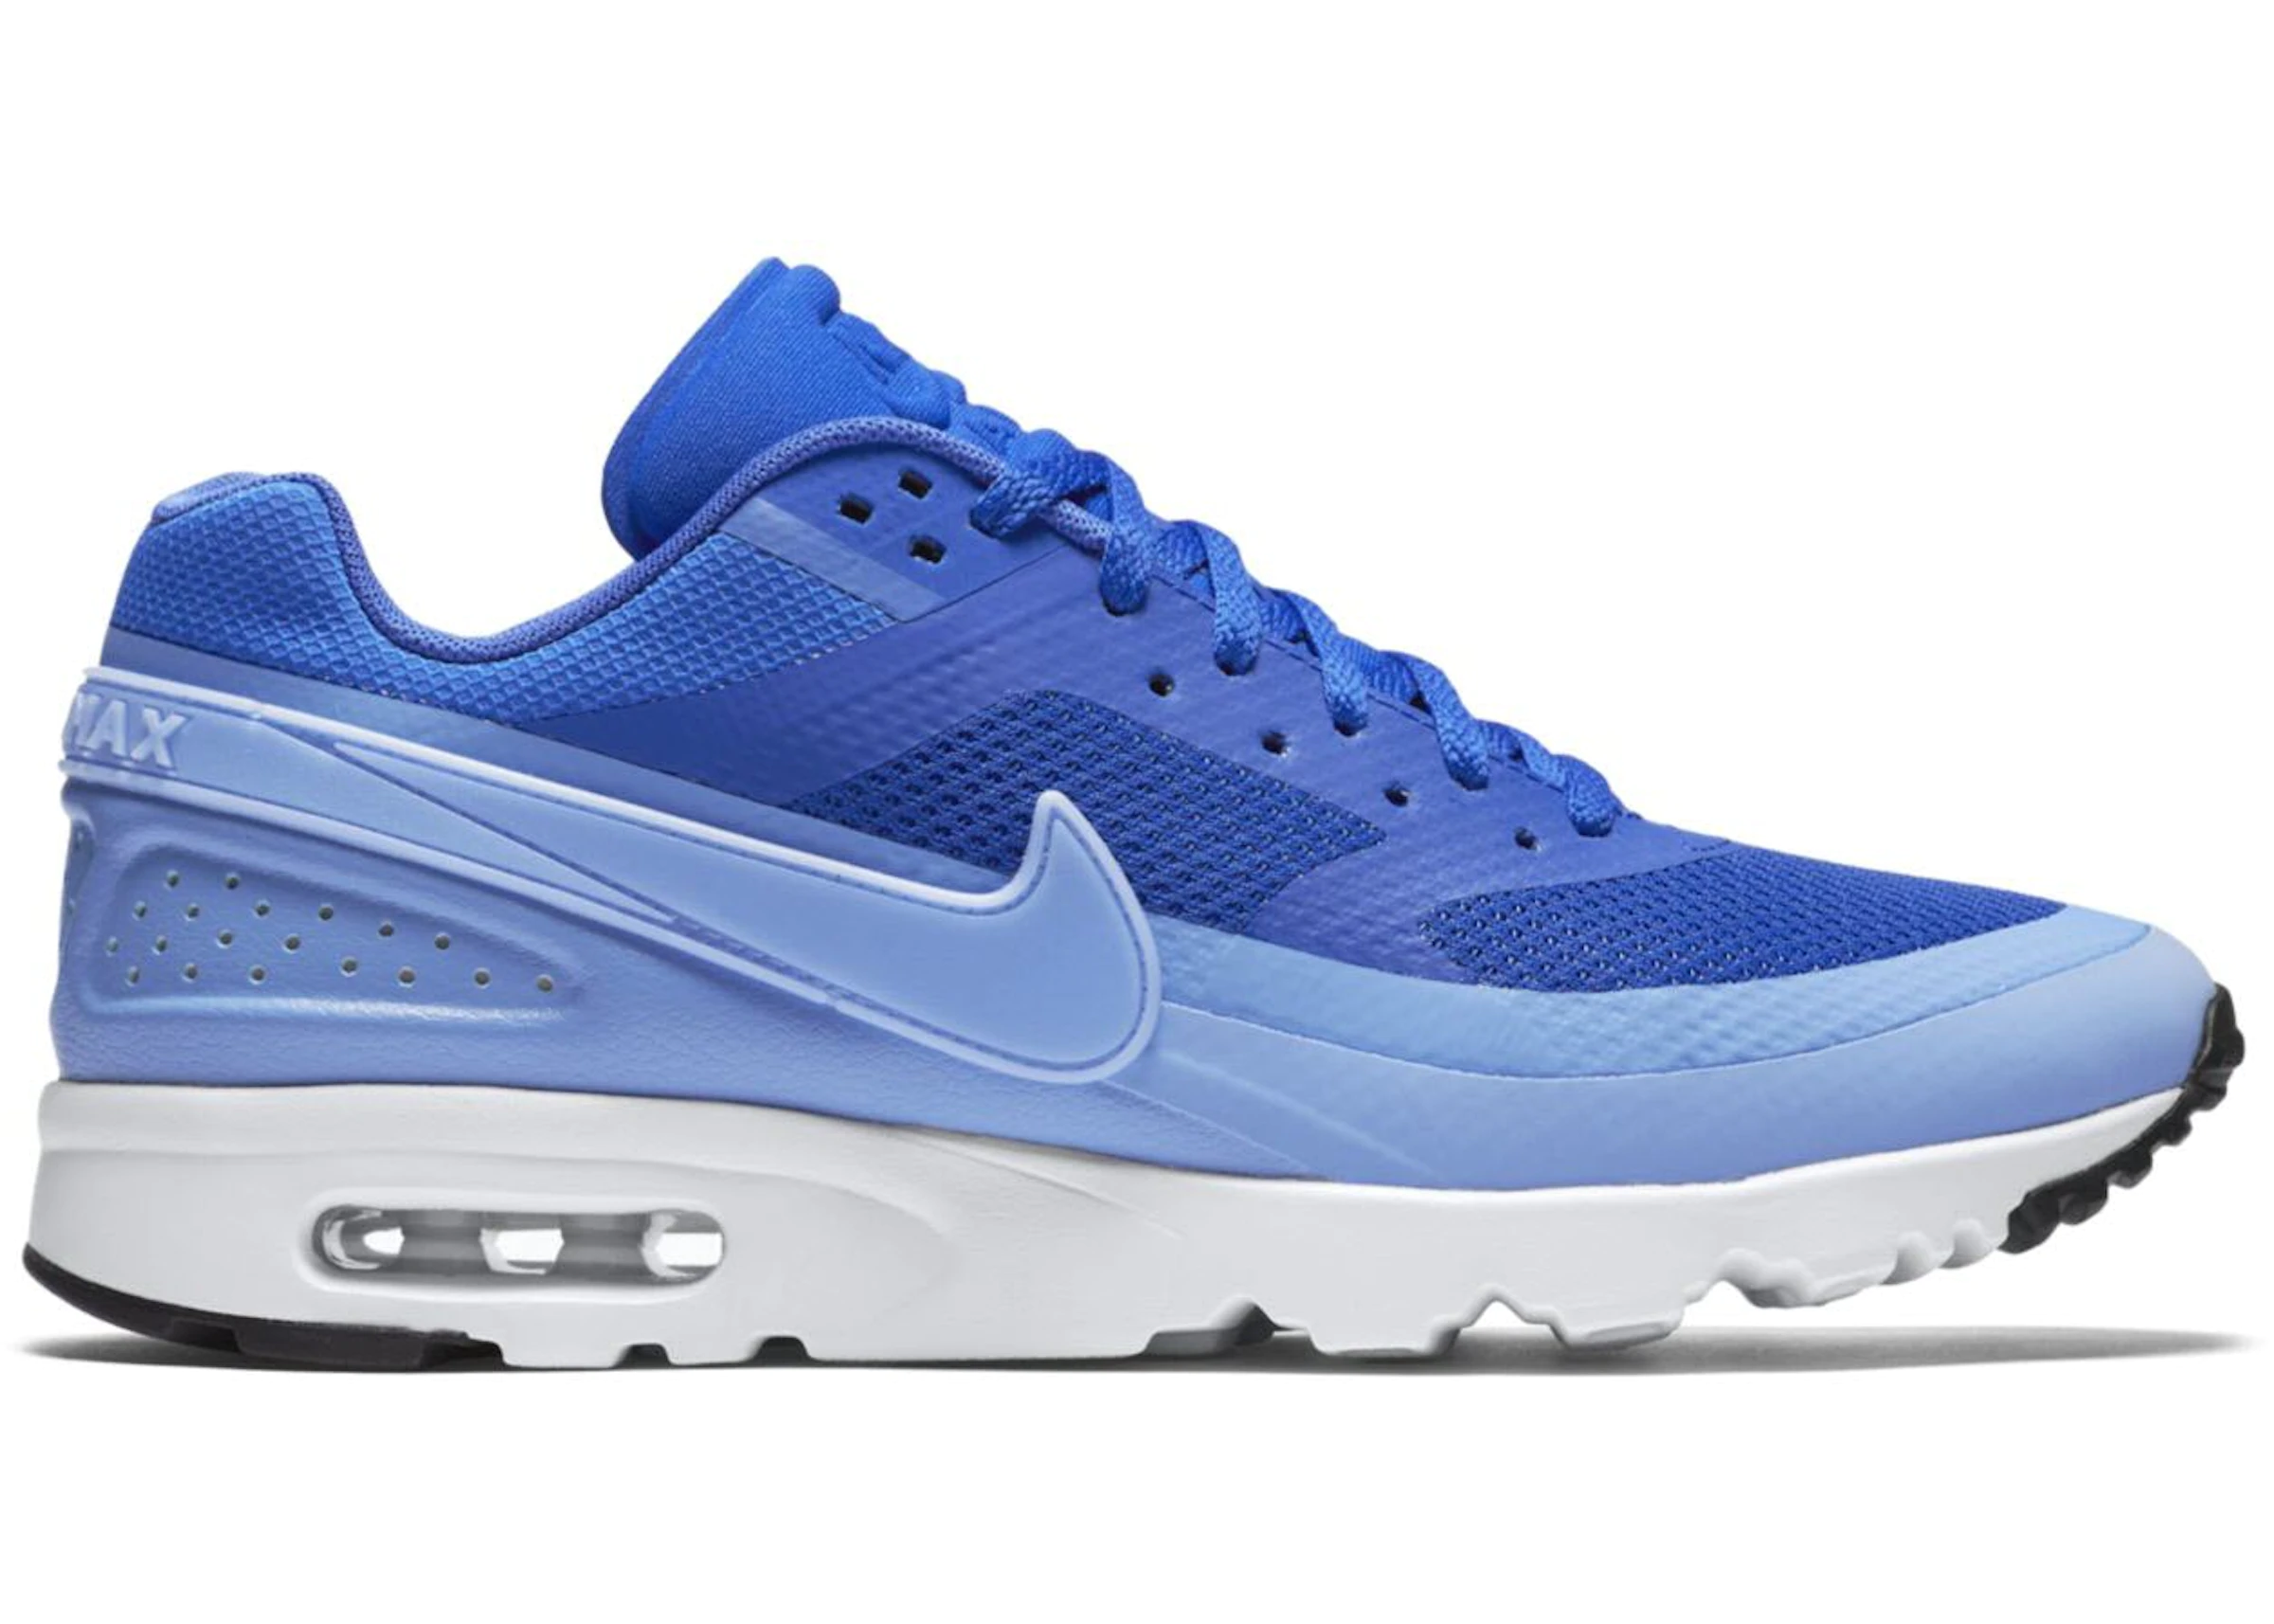 Nike Max BW Ultra Racer Blue (GS) - 819638-400 - US